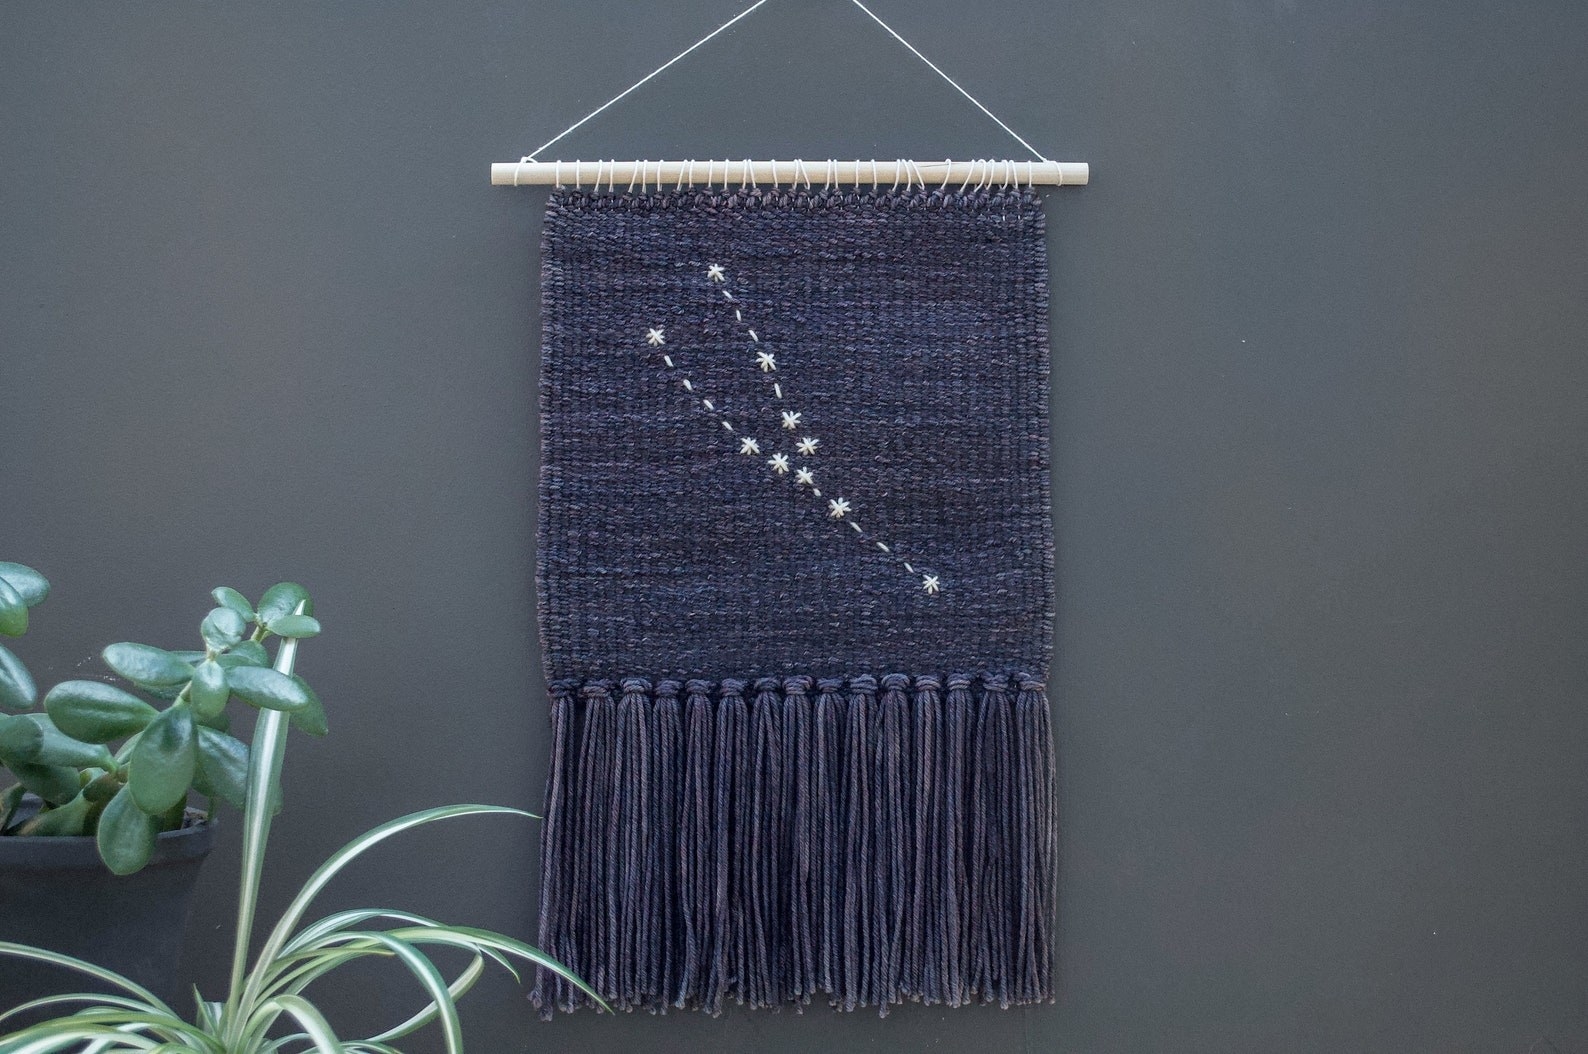 The Taurus wall hanging in black against a gray wall